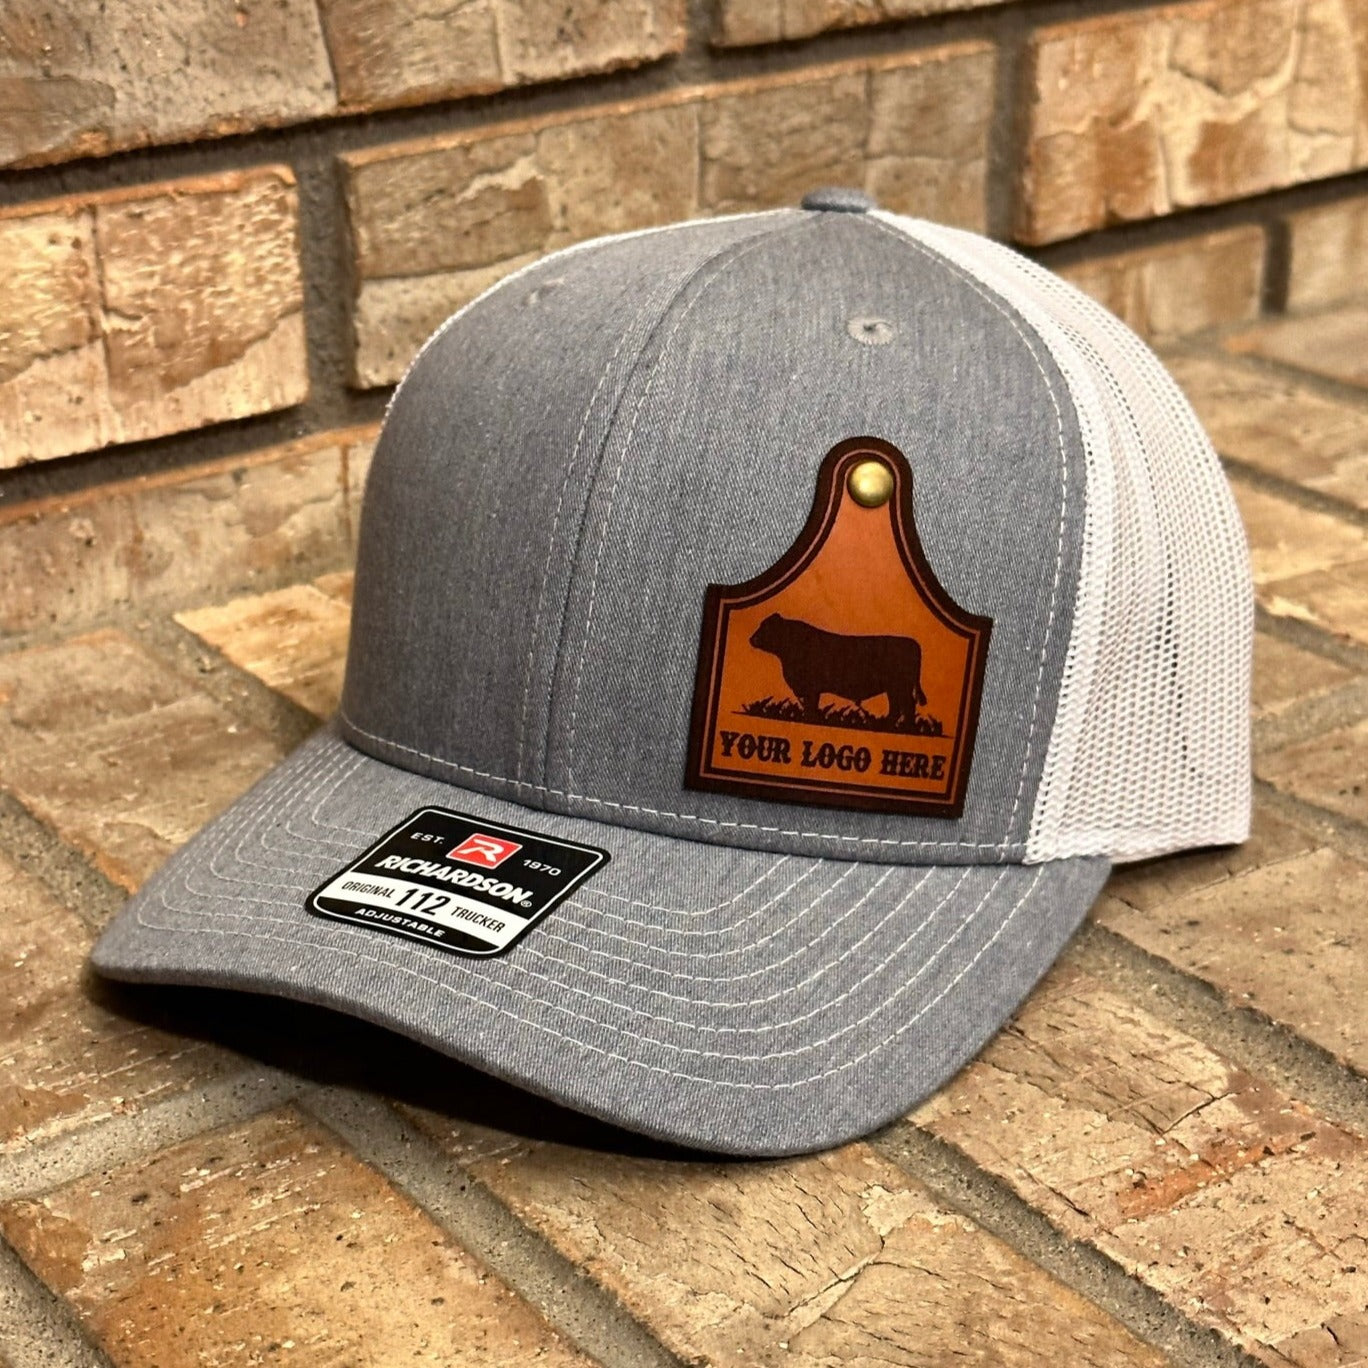 Purchase Wholesale custom leather hat patches. Free Returns & Net